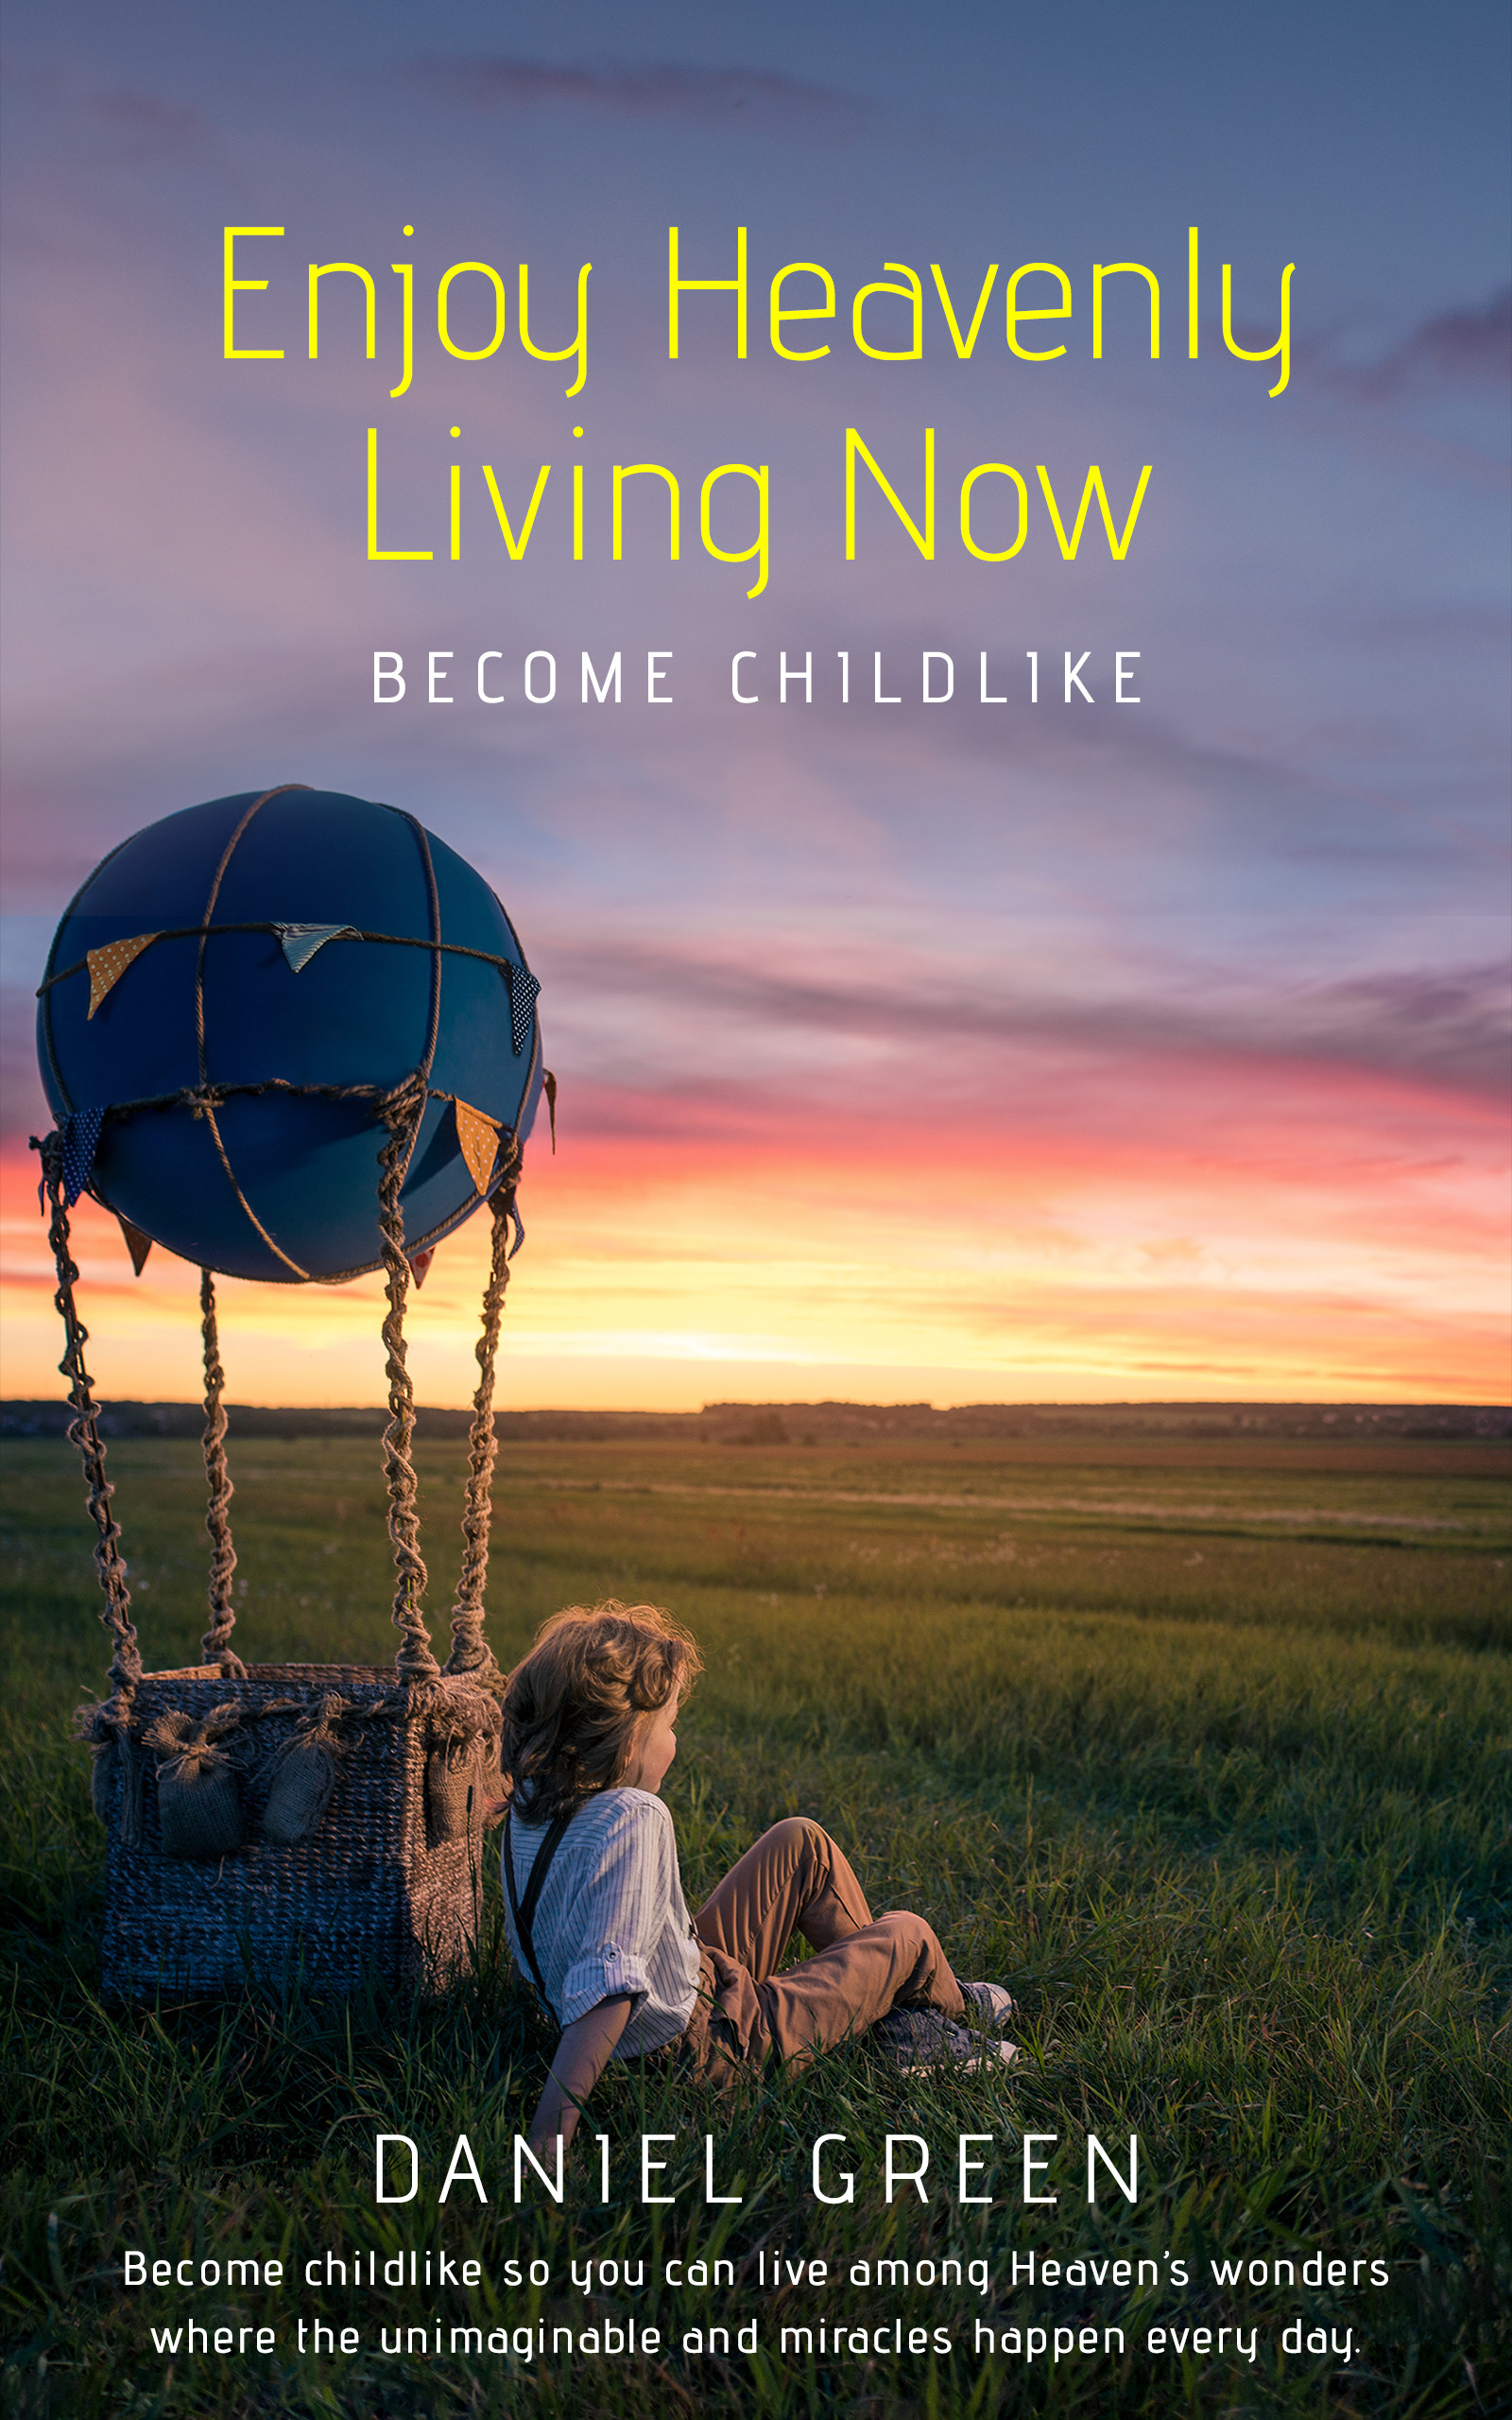 FREE: Enjoy Heavenly Living Now: Become Childlike by Daniel Green